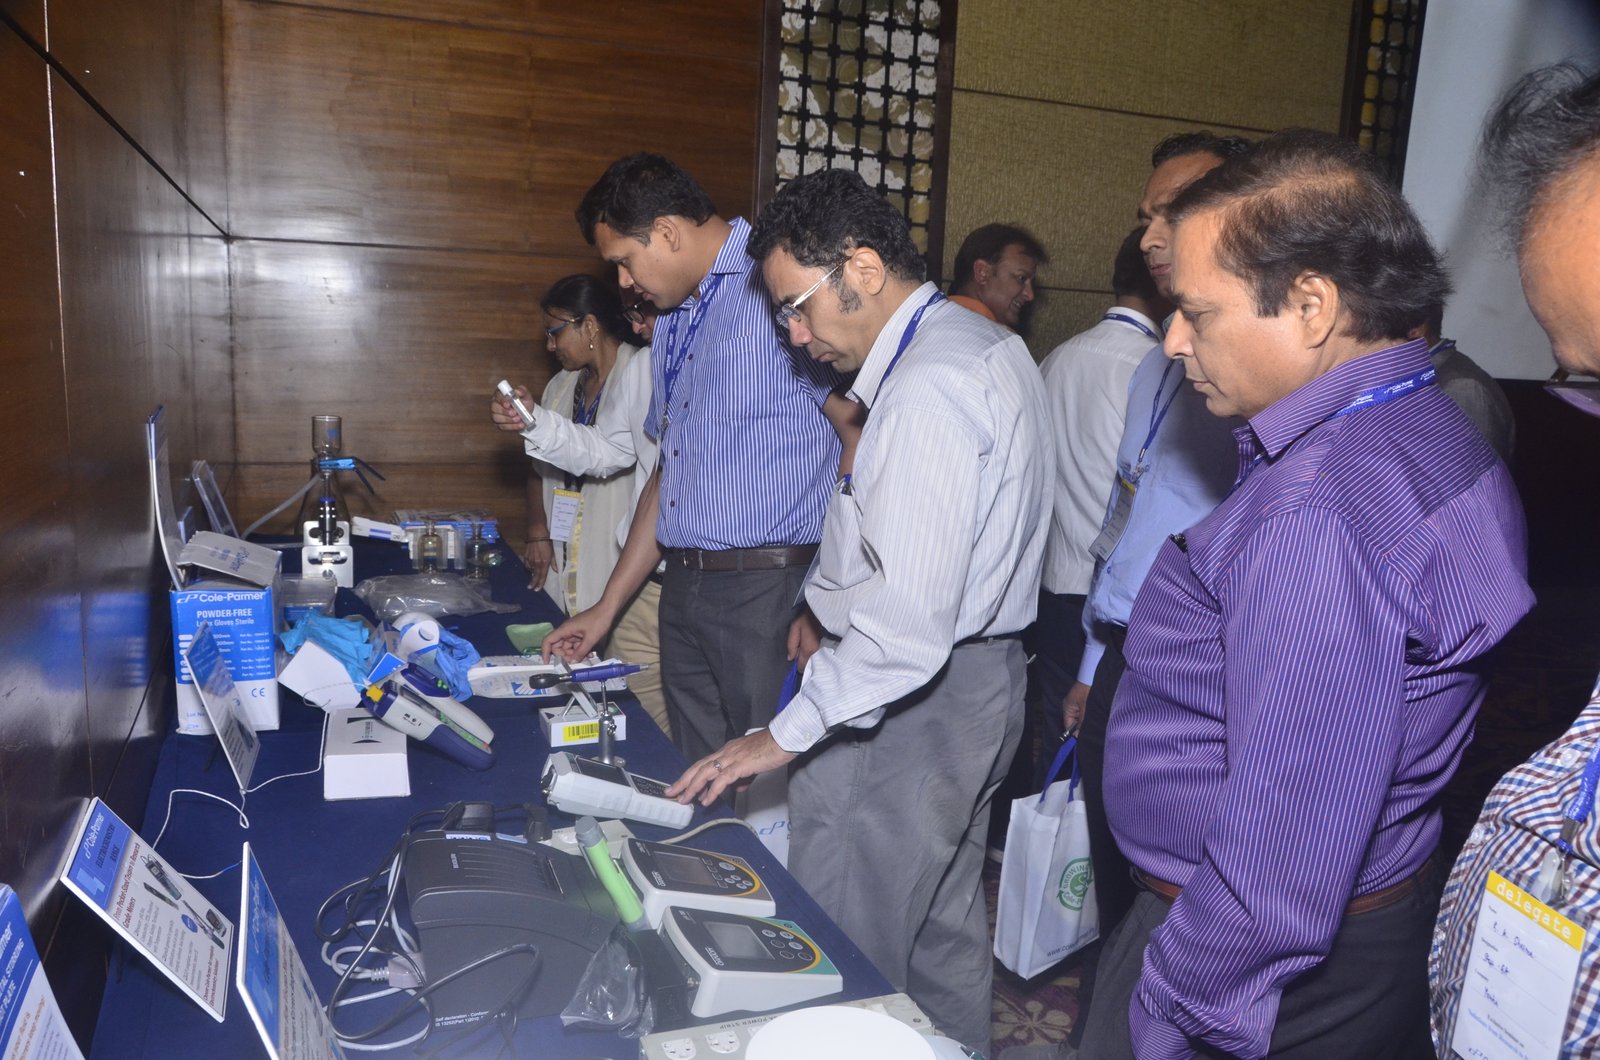 Participants from industry taking a look at various product samples of Cole Parmer showcased at the event.